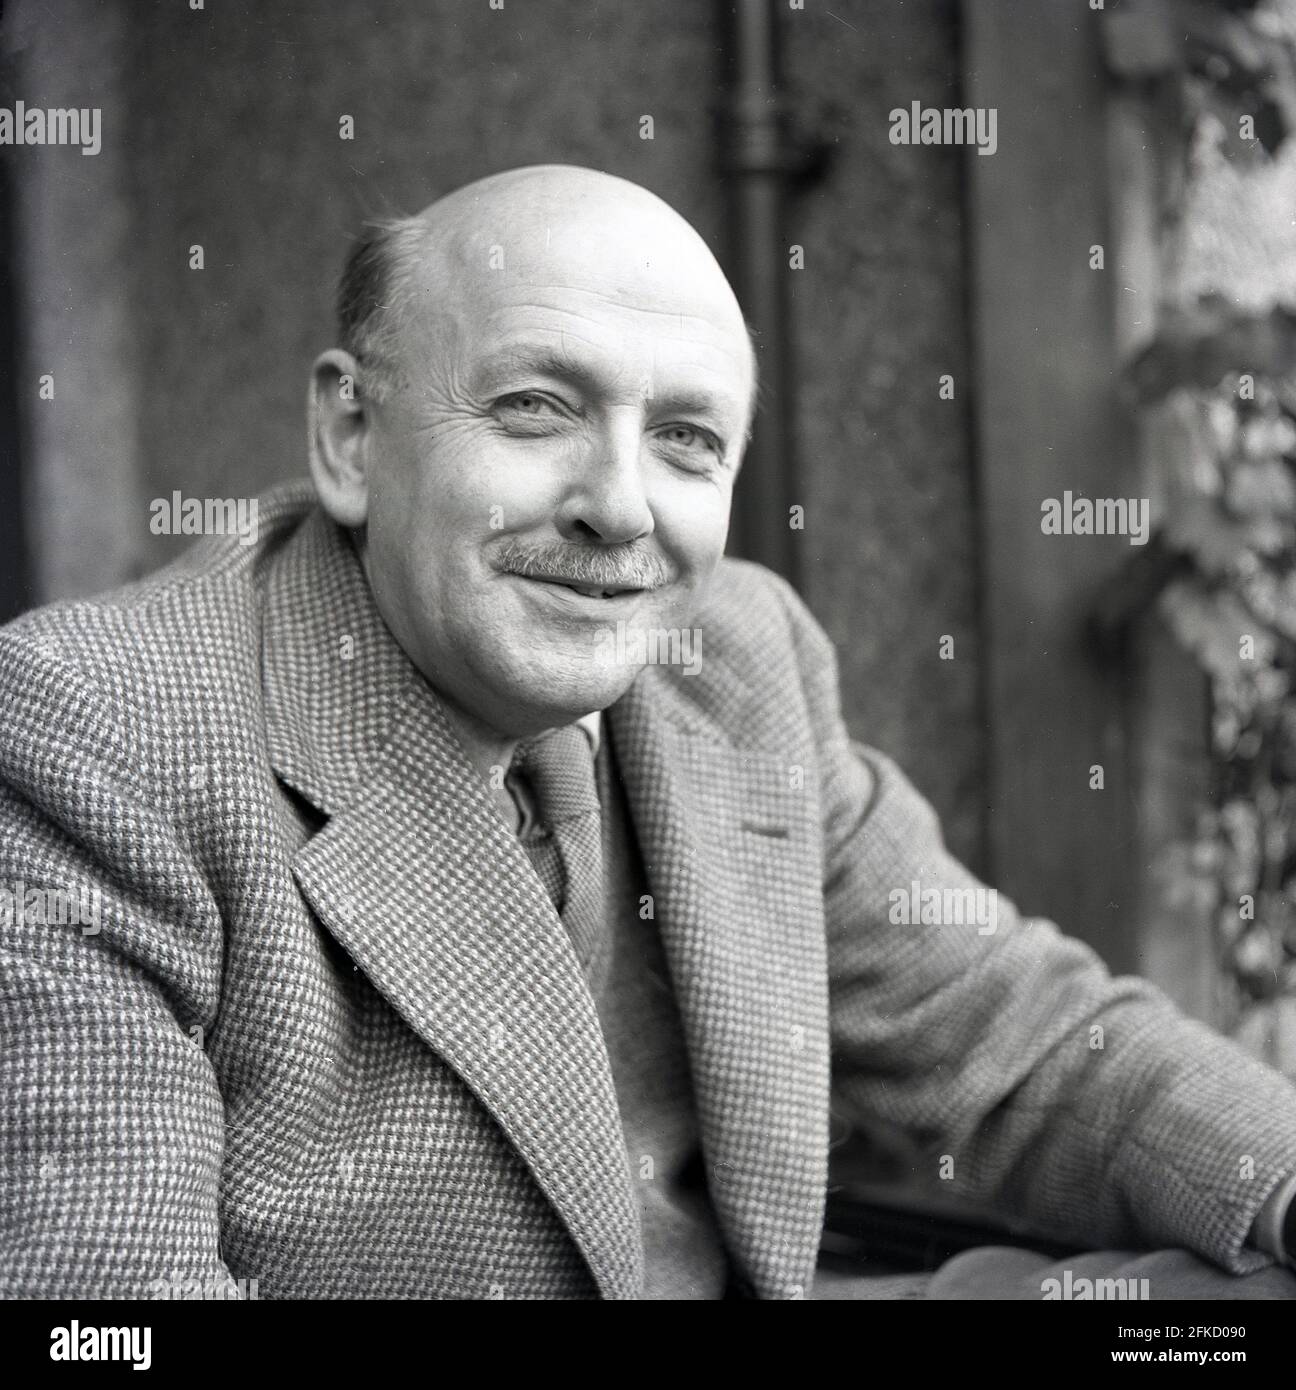 1950s, historical, a portrait by J Allan Cash of Brian Vesey-Fitzgerald, a naturalist and writer of books on nature, country life, birds and dogs. Also an editor of The Field magazine. He was a descendant of the Vesty-Fitzgeralds, a famous Ango-Irish family whose members became MPs in both British and Irish governments. Born in 1905 in Wrexham, Denbighshire, Wales, as Brian Percy Seymour Vesey-Fitzgerald, he is seen here wearing traditonal country clothing of a tweed jacket and tie. He was also an authority on the history of Gypsies in the British Isles, with several books on the subject. Stock Photo